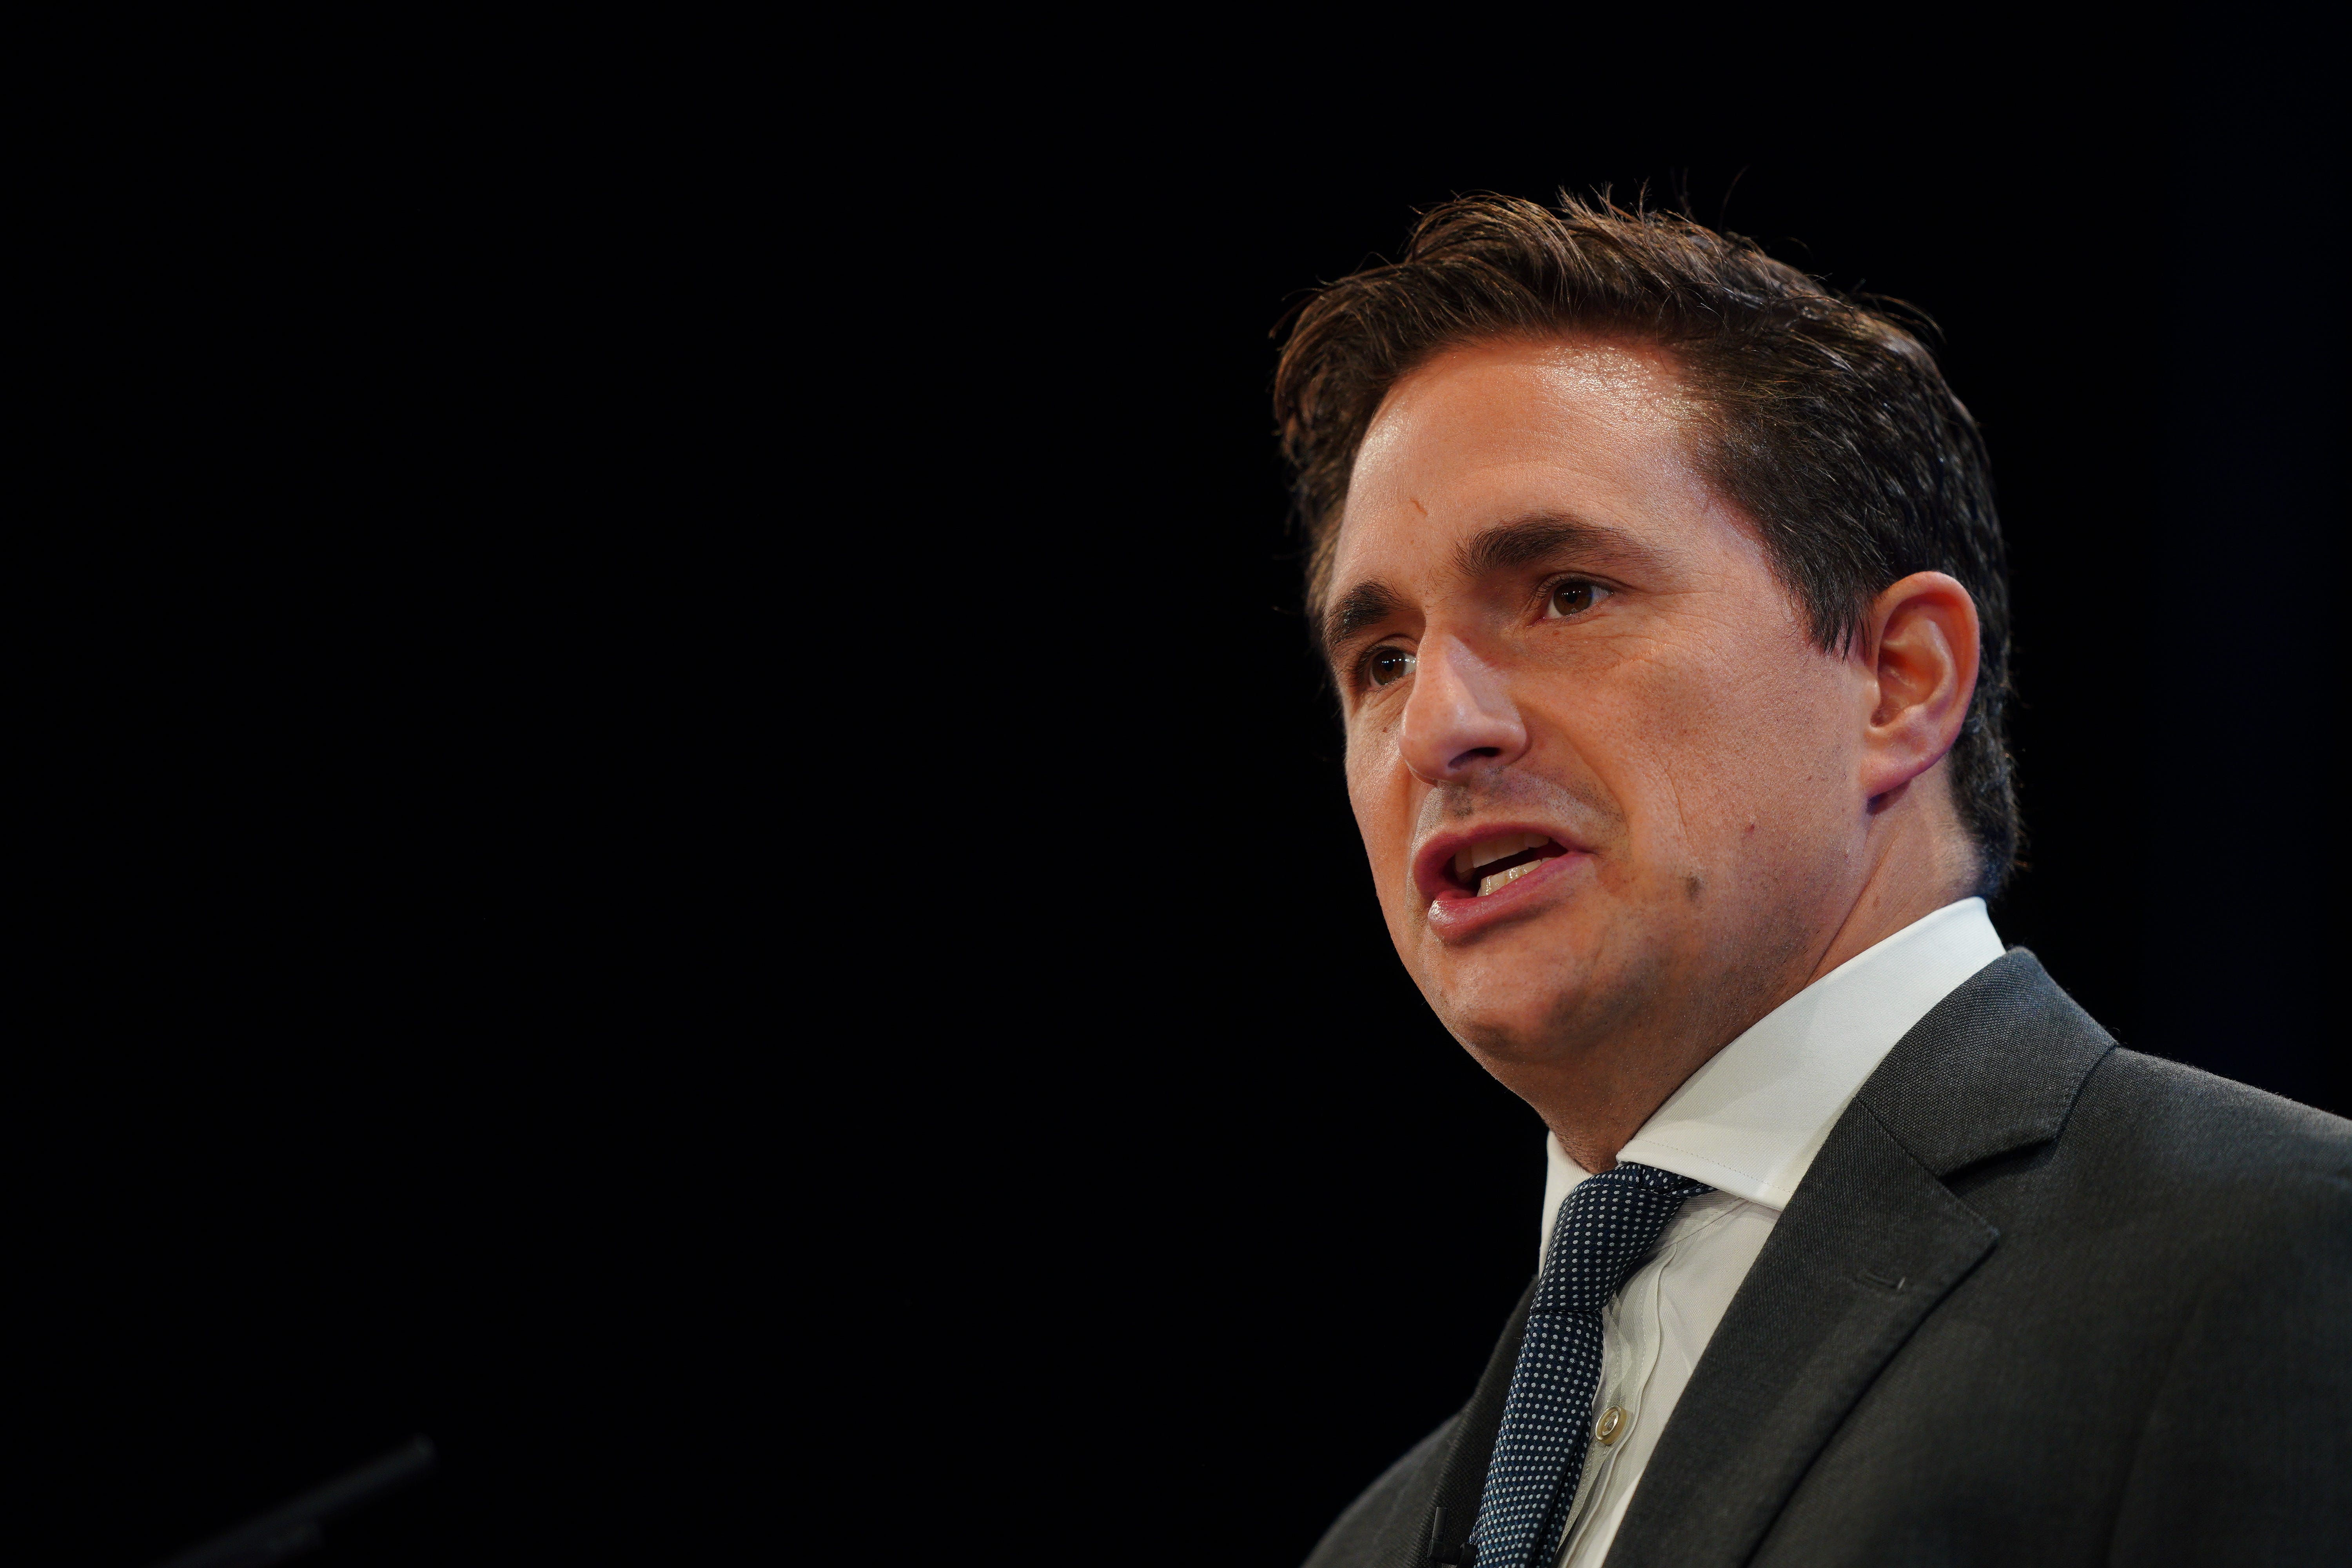 Minister for veterans’ affairs Johnny Mercer continued his evidence to the inquiry on Wednesday